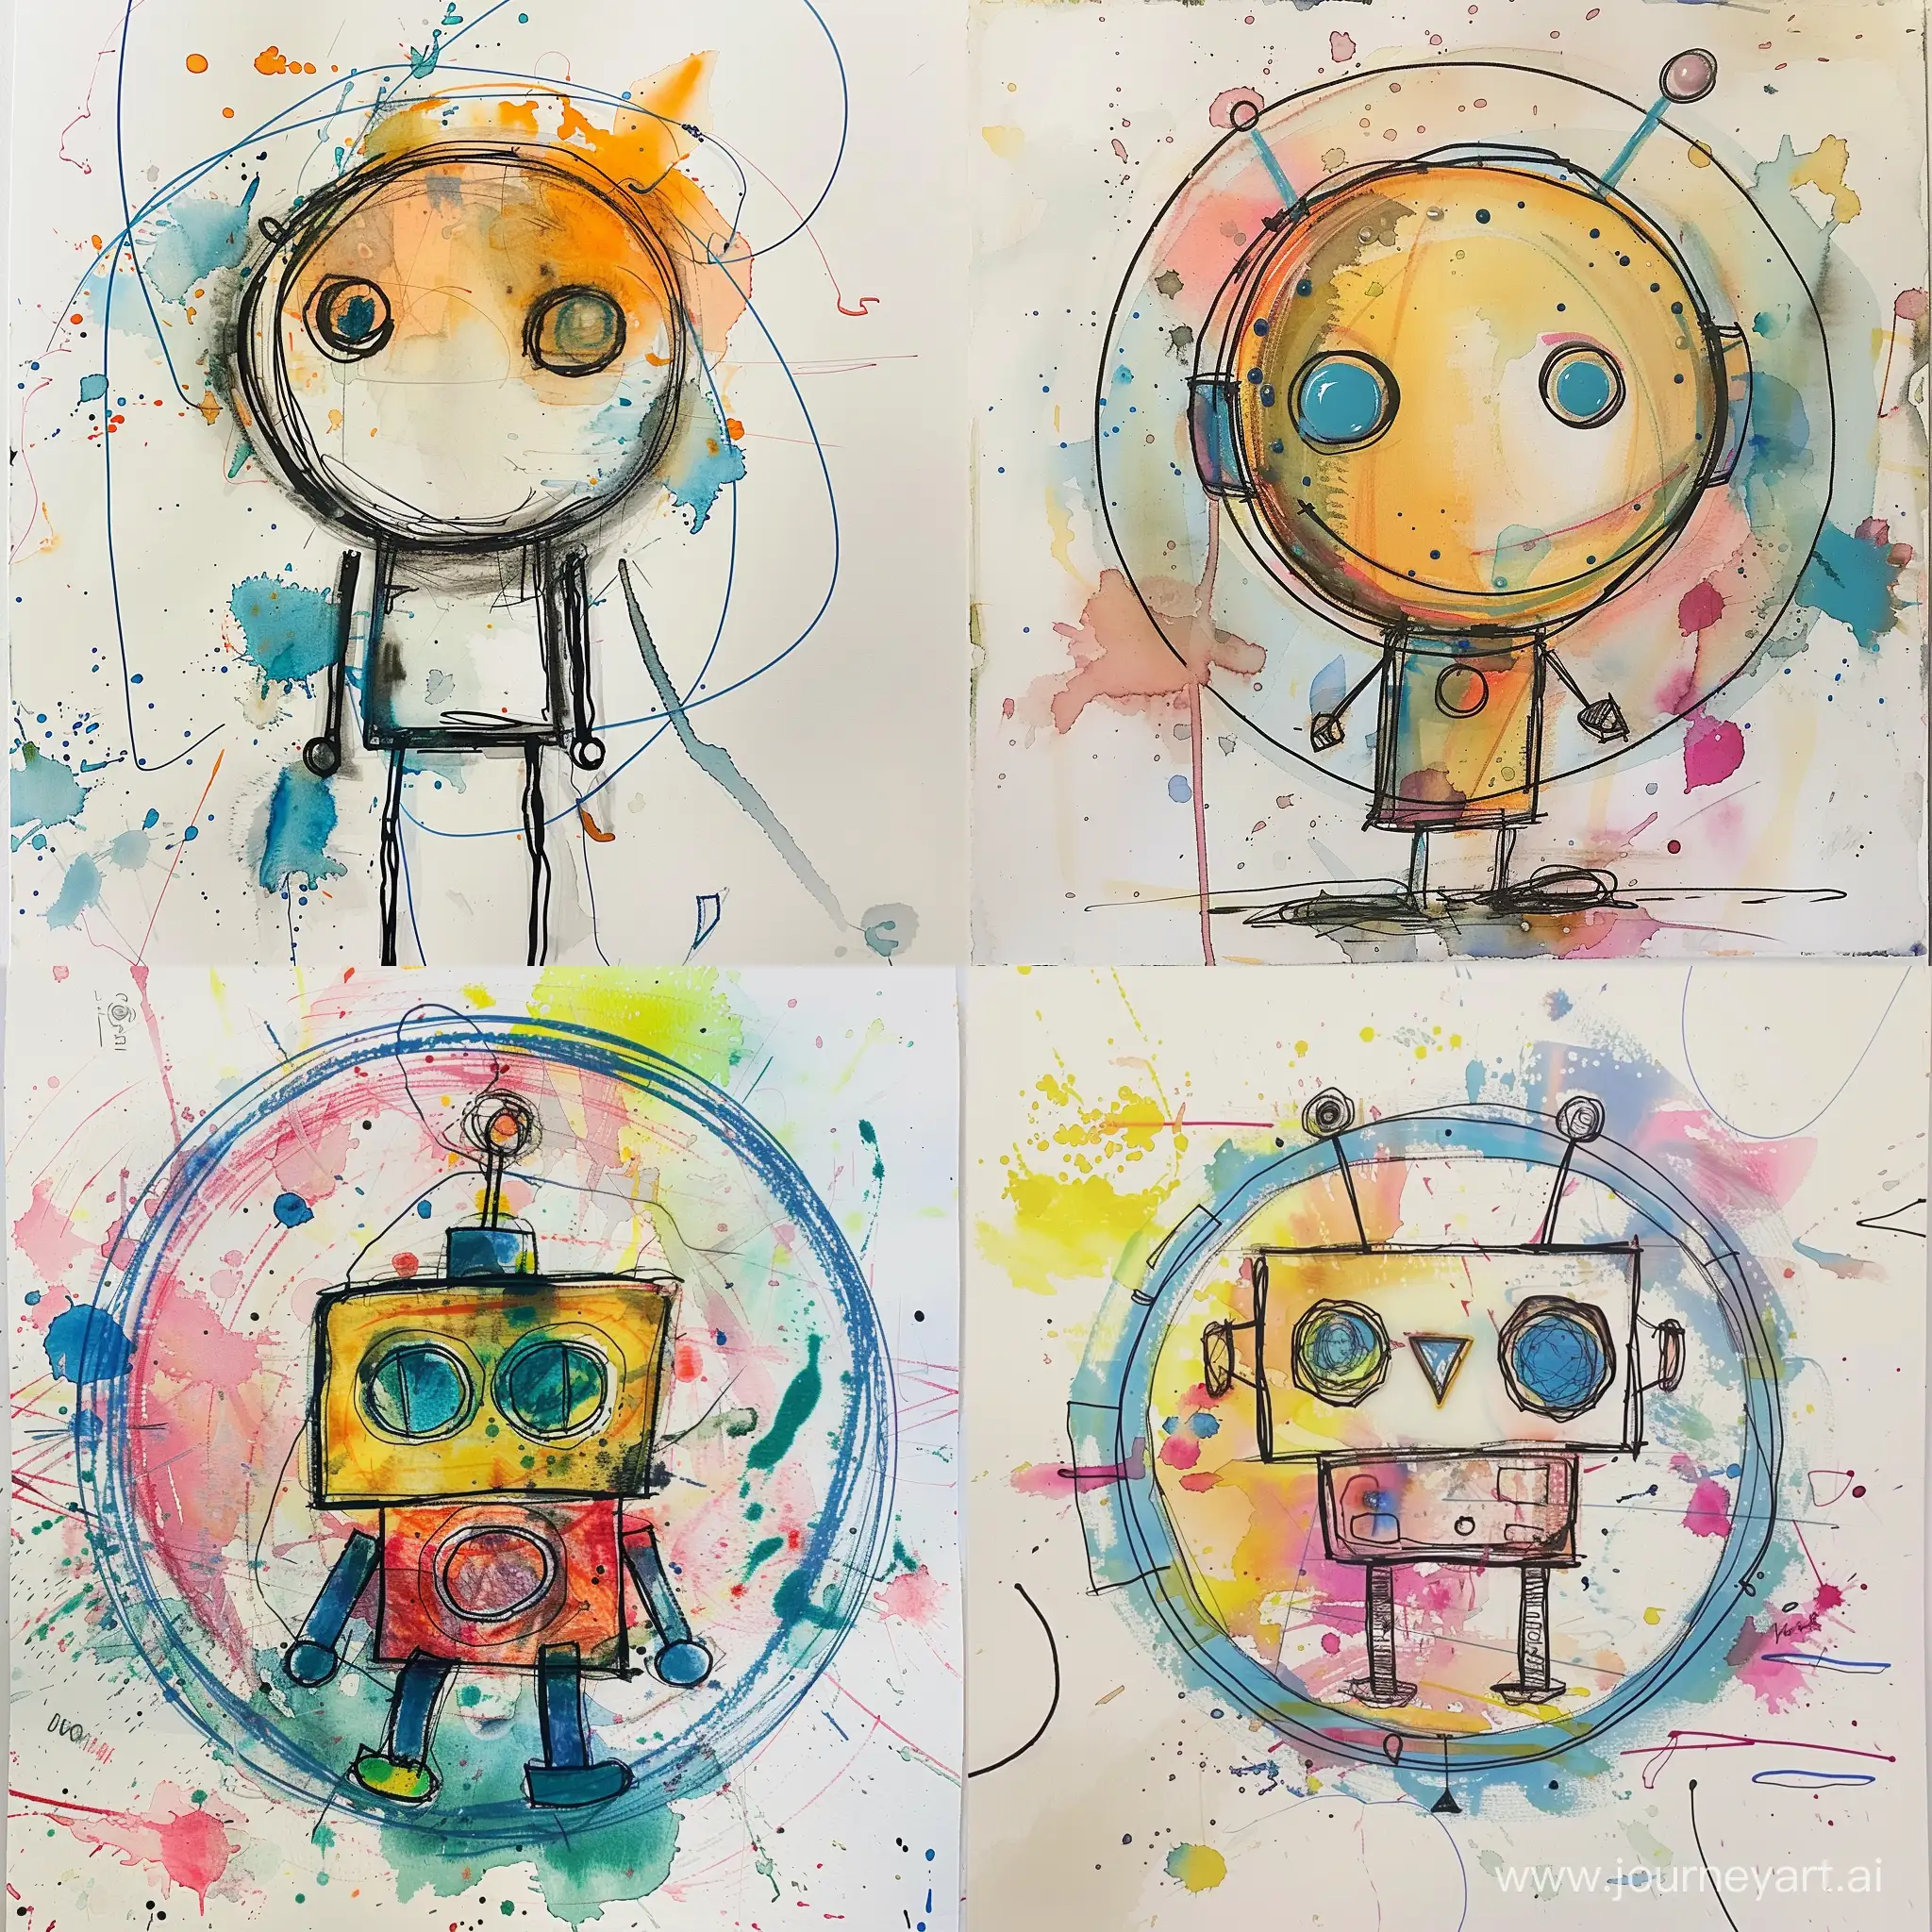 Acid Art with encaustic round shapes gestural loose watercolor painting of a whimsical robot drawn by a 5 year old child, accented with soft blue pen and ink lines, color with splashes